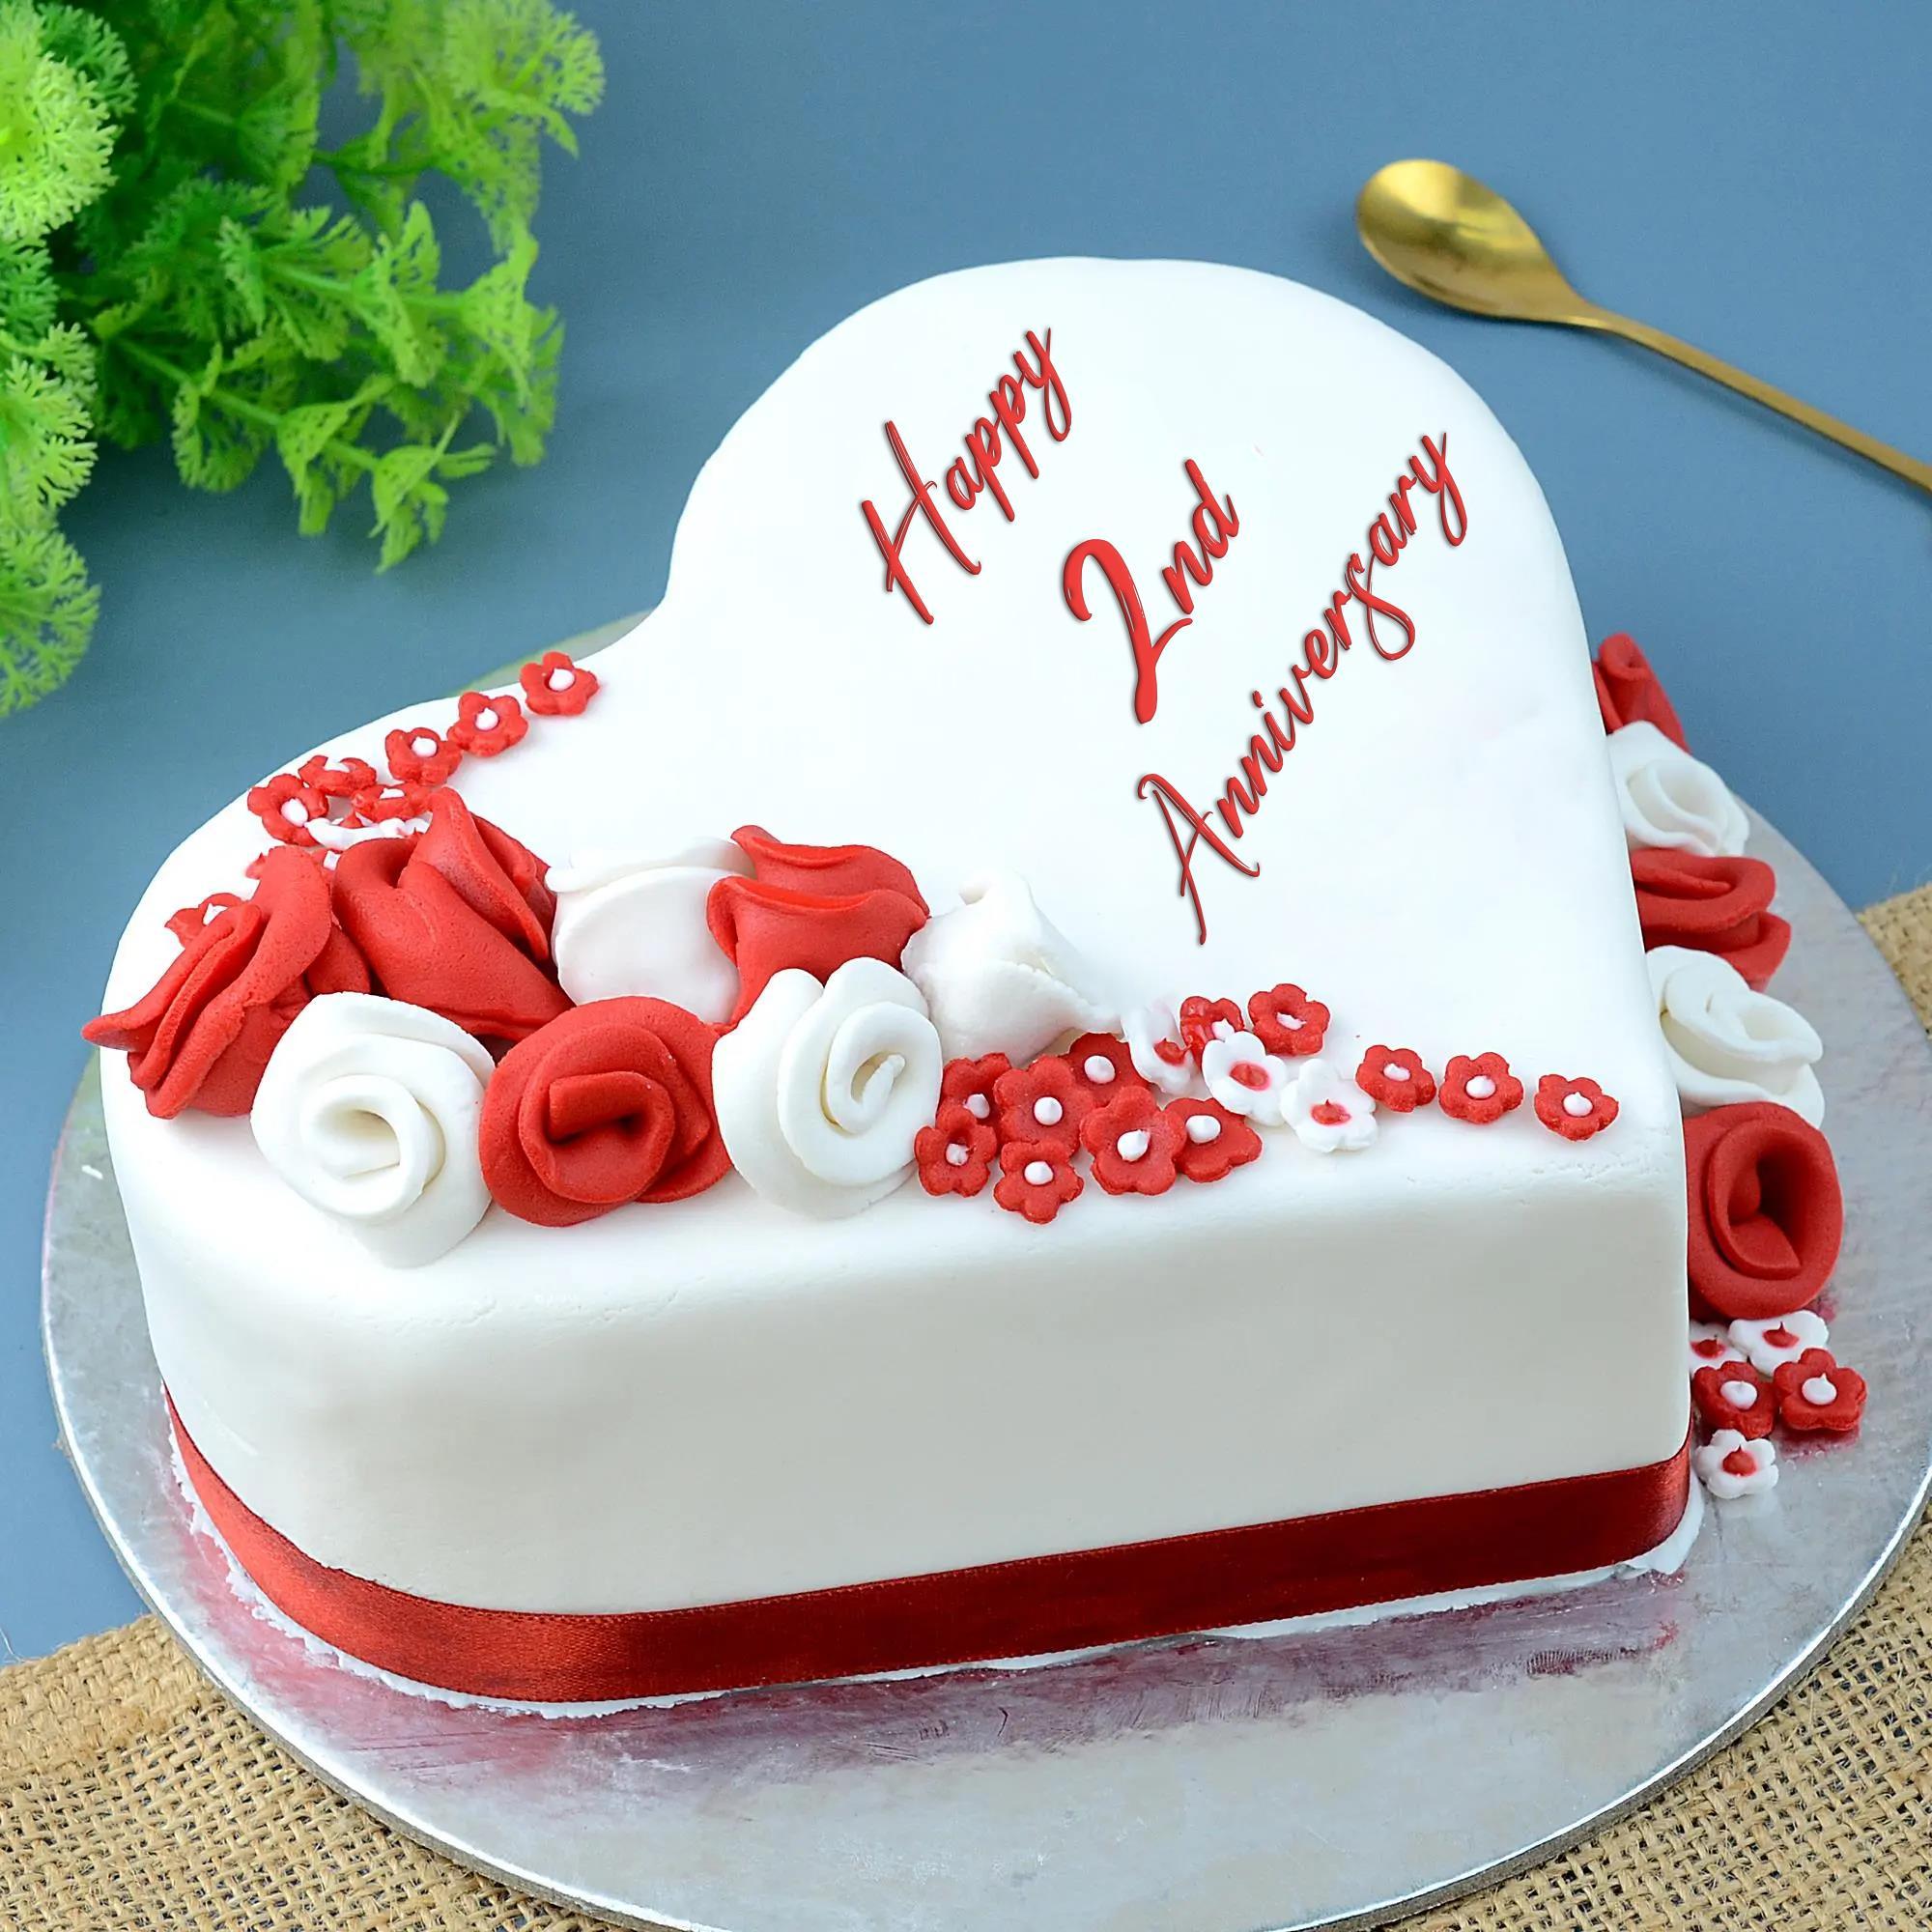 Pink Heart Shape Anniversary Cake| Order Cake Online In Indore| Safe  Delivery| Onlin… | Happy anniversary cakes, 2nd wedding anniversary, Wedding  anniversary cakes